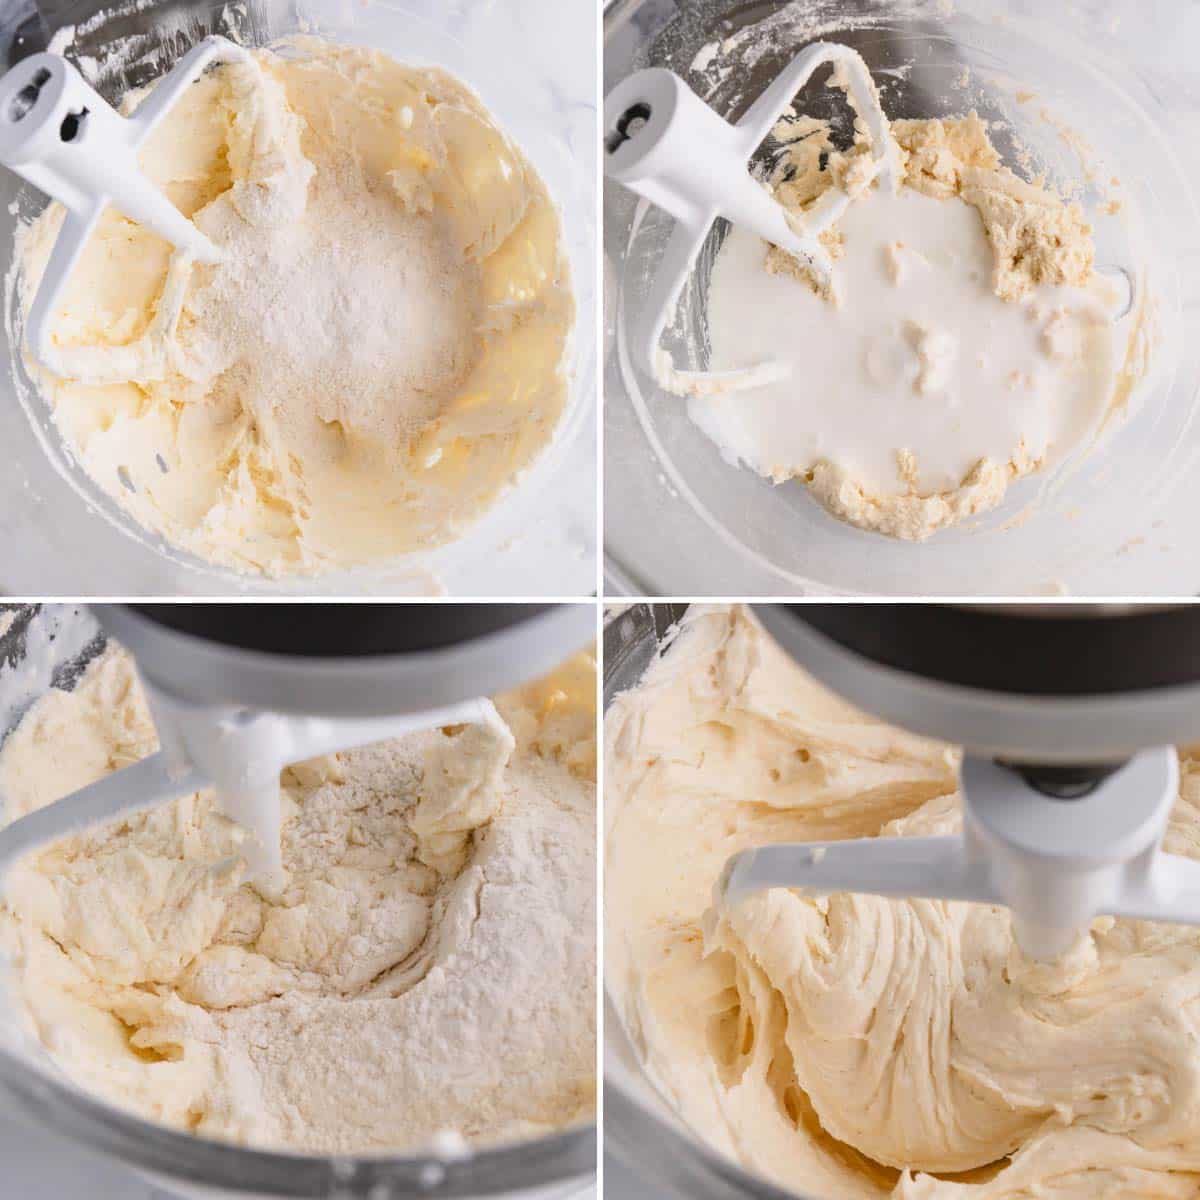 Four images showing the process of making vanilla bean cake batter in a stand mixer.